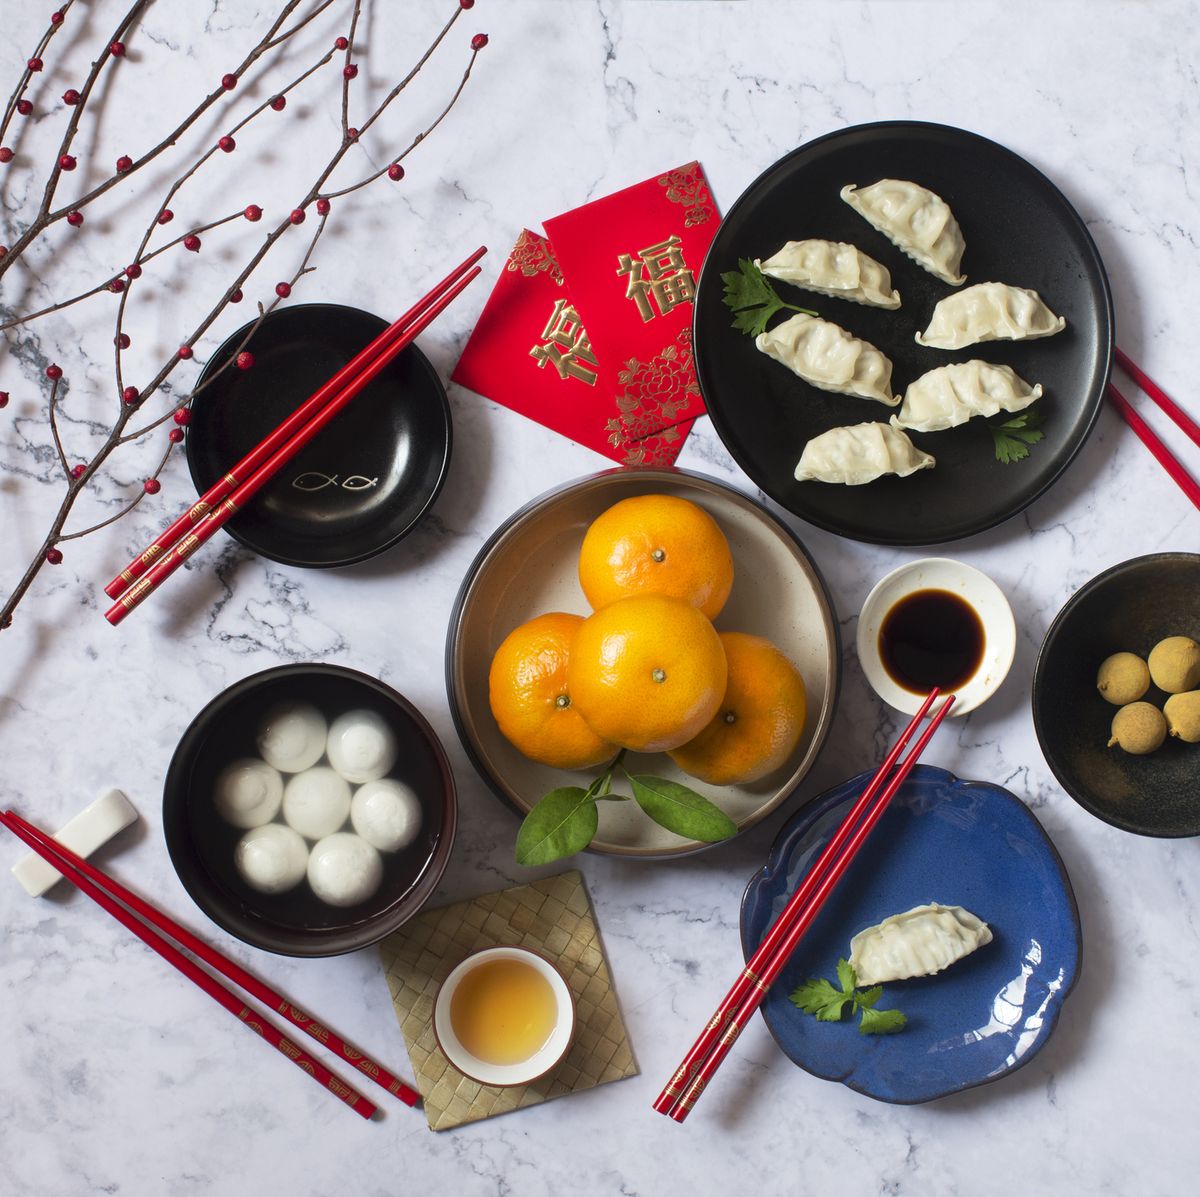 6 Traditional Chinese New Year Foods That Will Bring You Good Luck